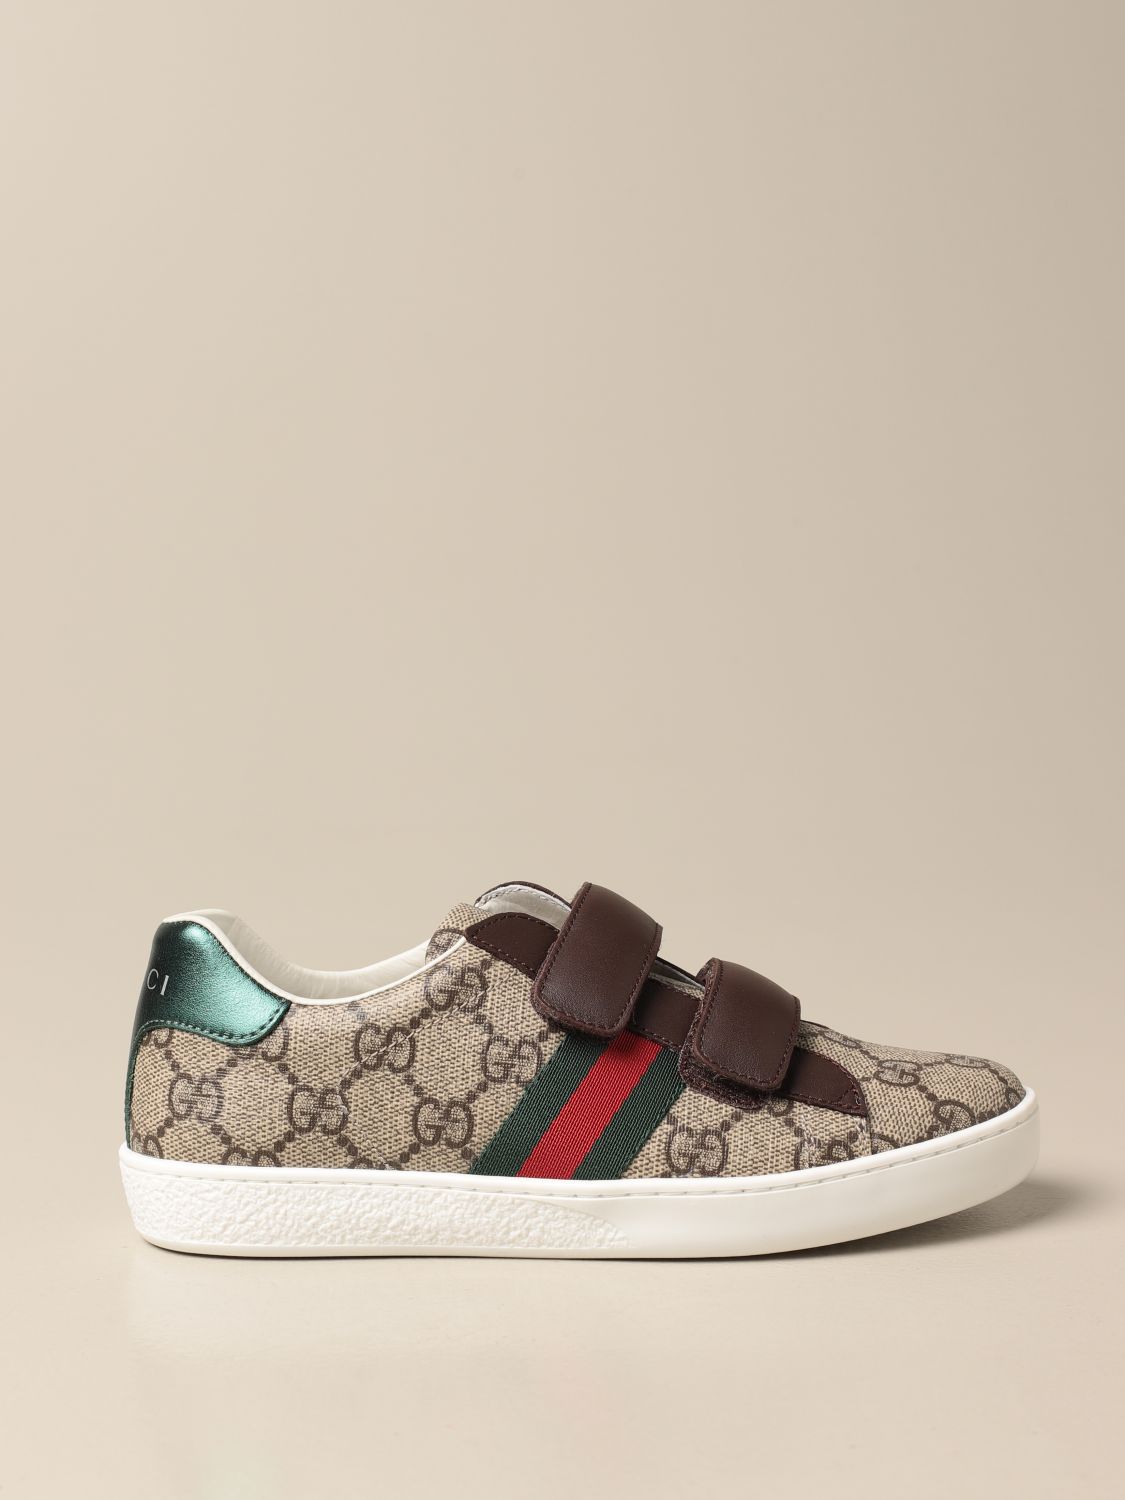 gucci shoes for 1 year old